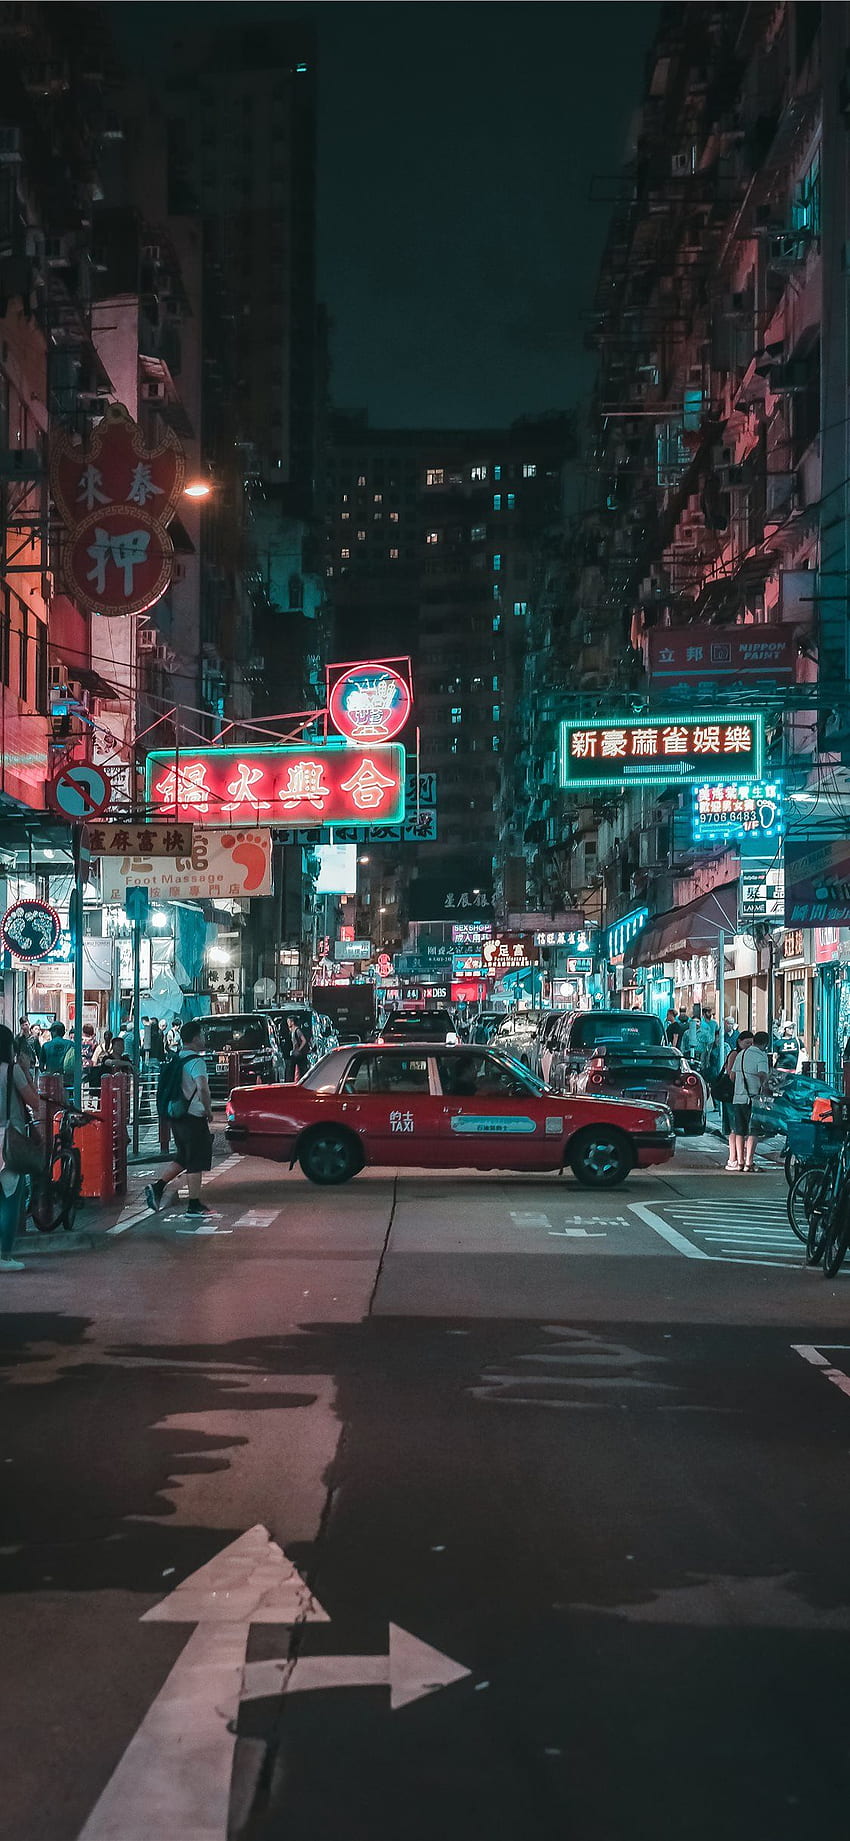 500+ Hong Kong Pictures | Download Free Images on Unsplash